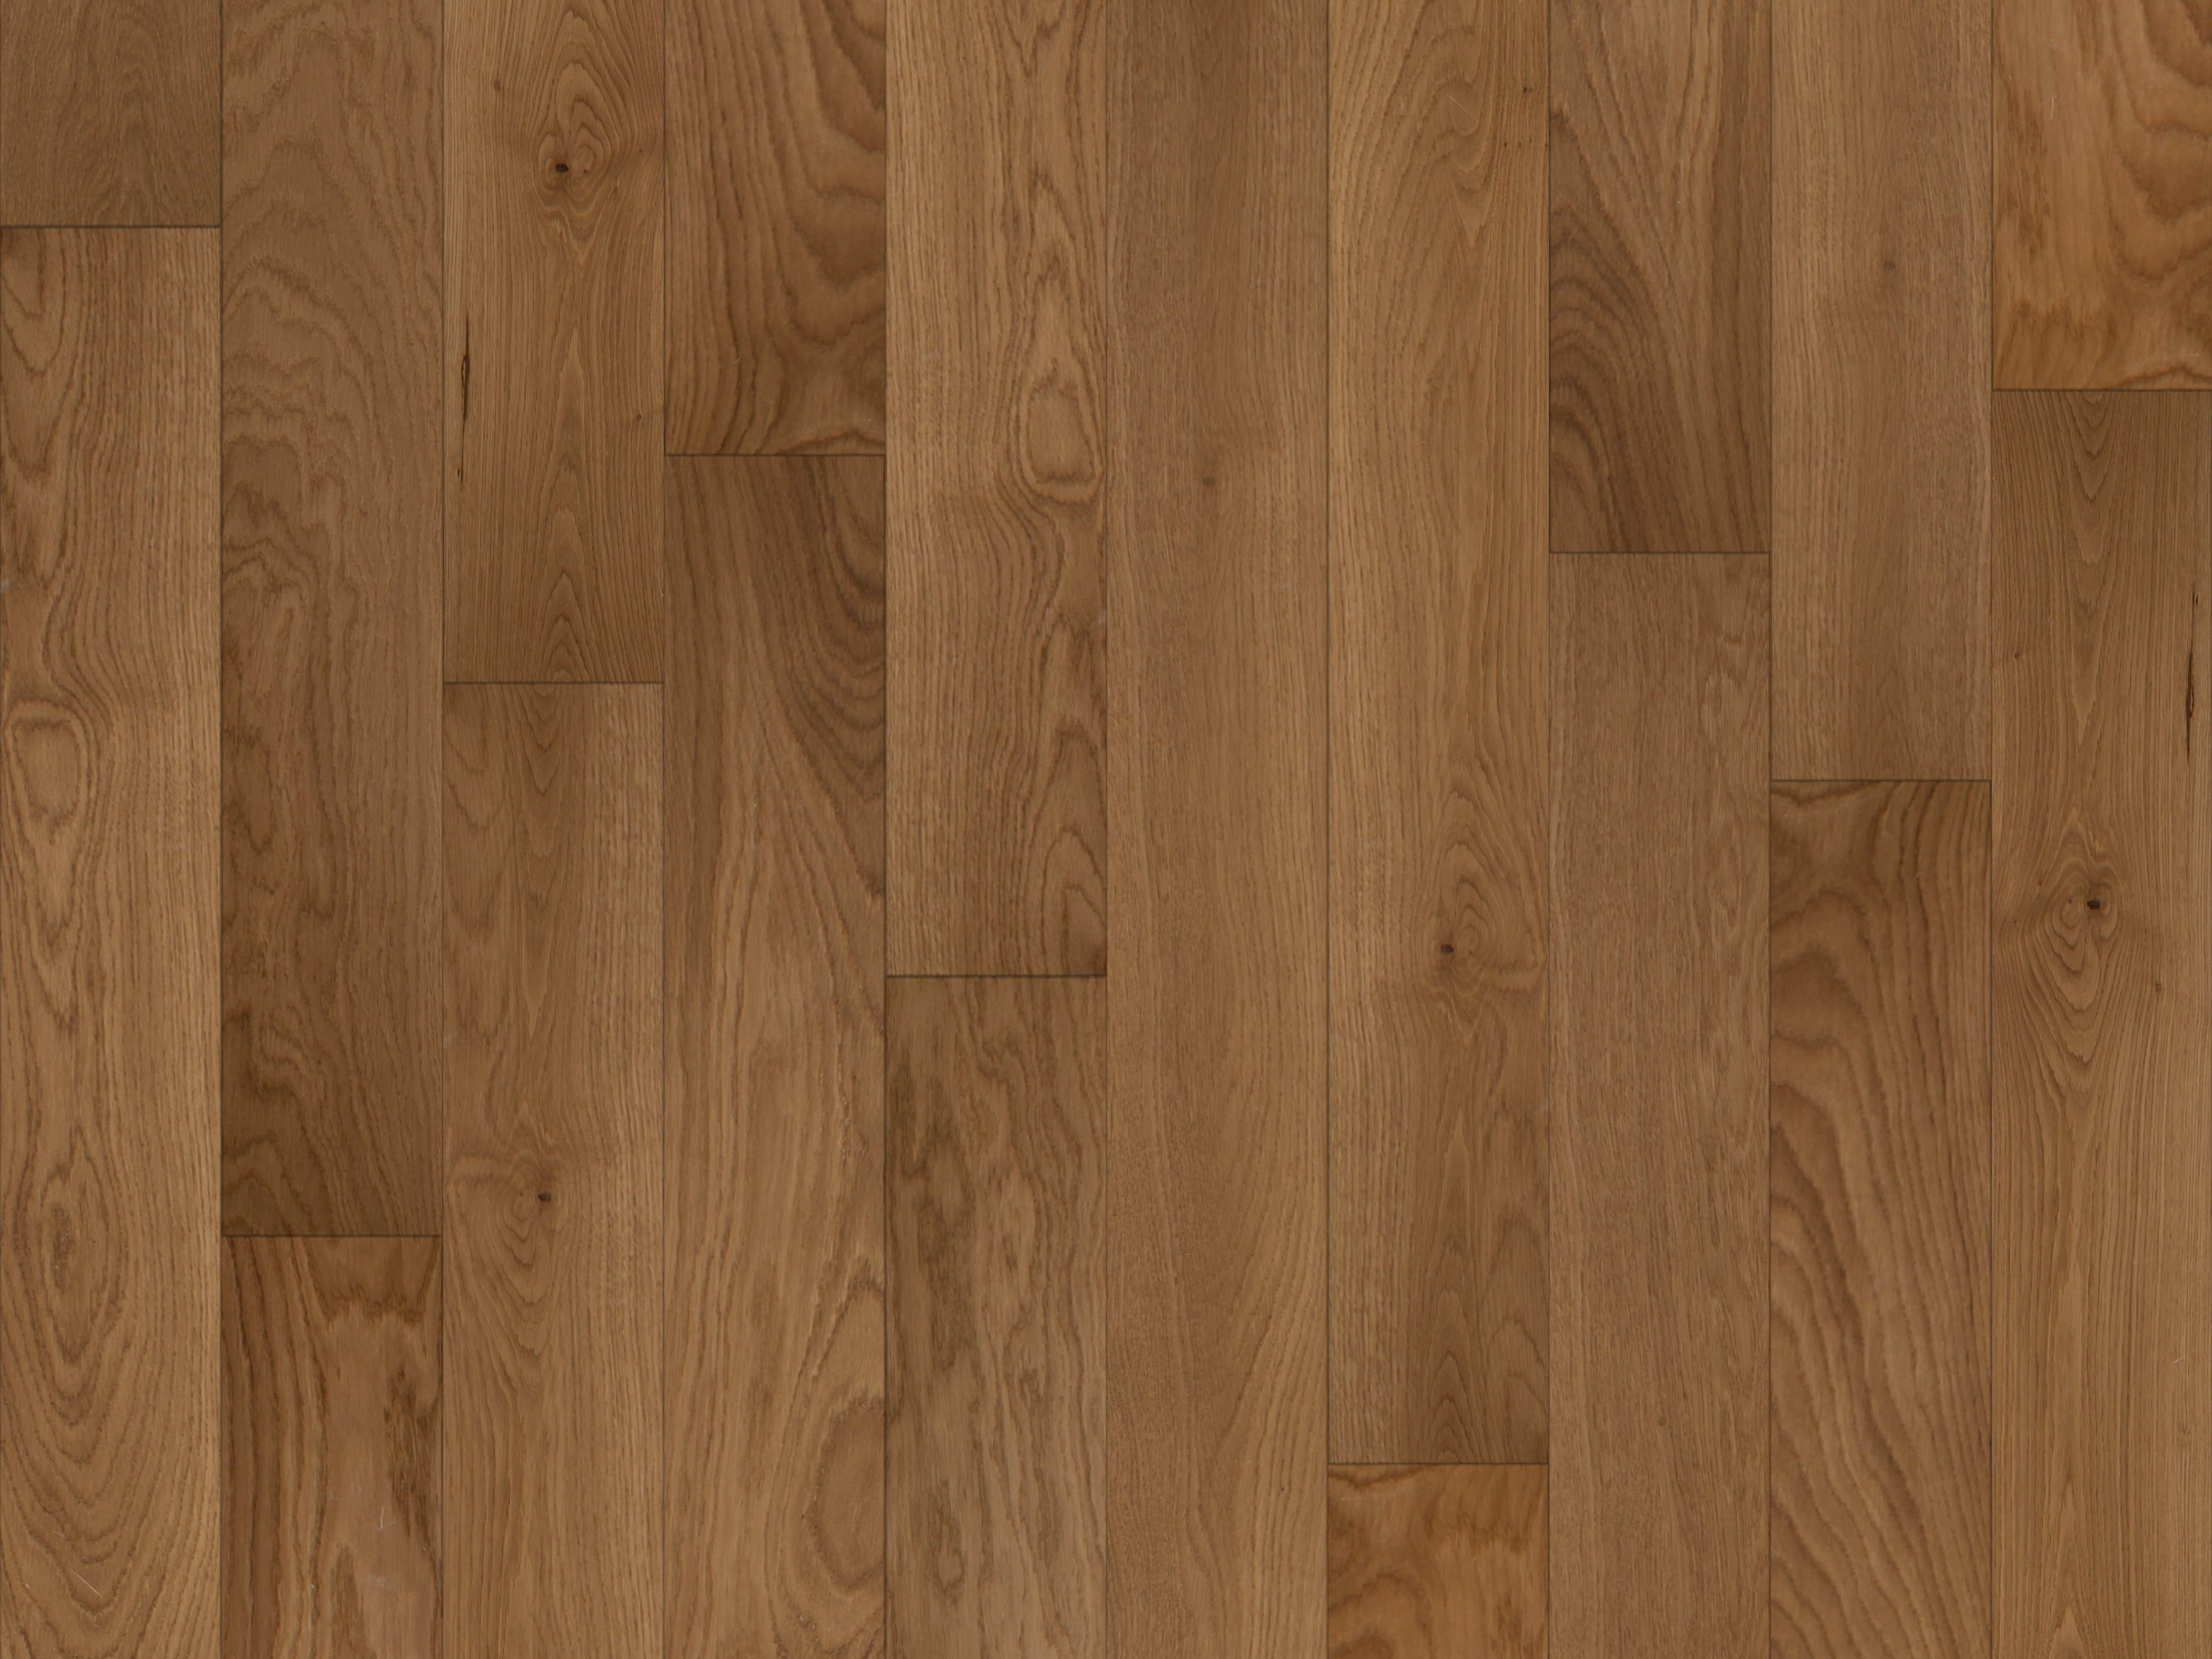 duchateau signature vernal bois fume european oak engineered hardnatural wood floor uv oil finish for interior use distributed by surface group international